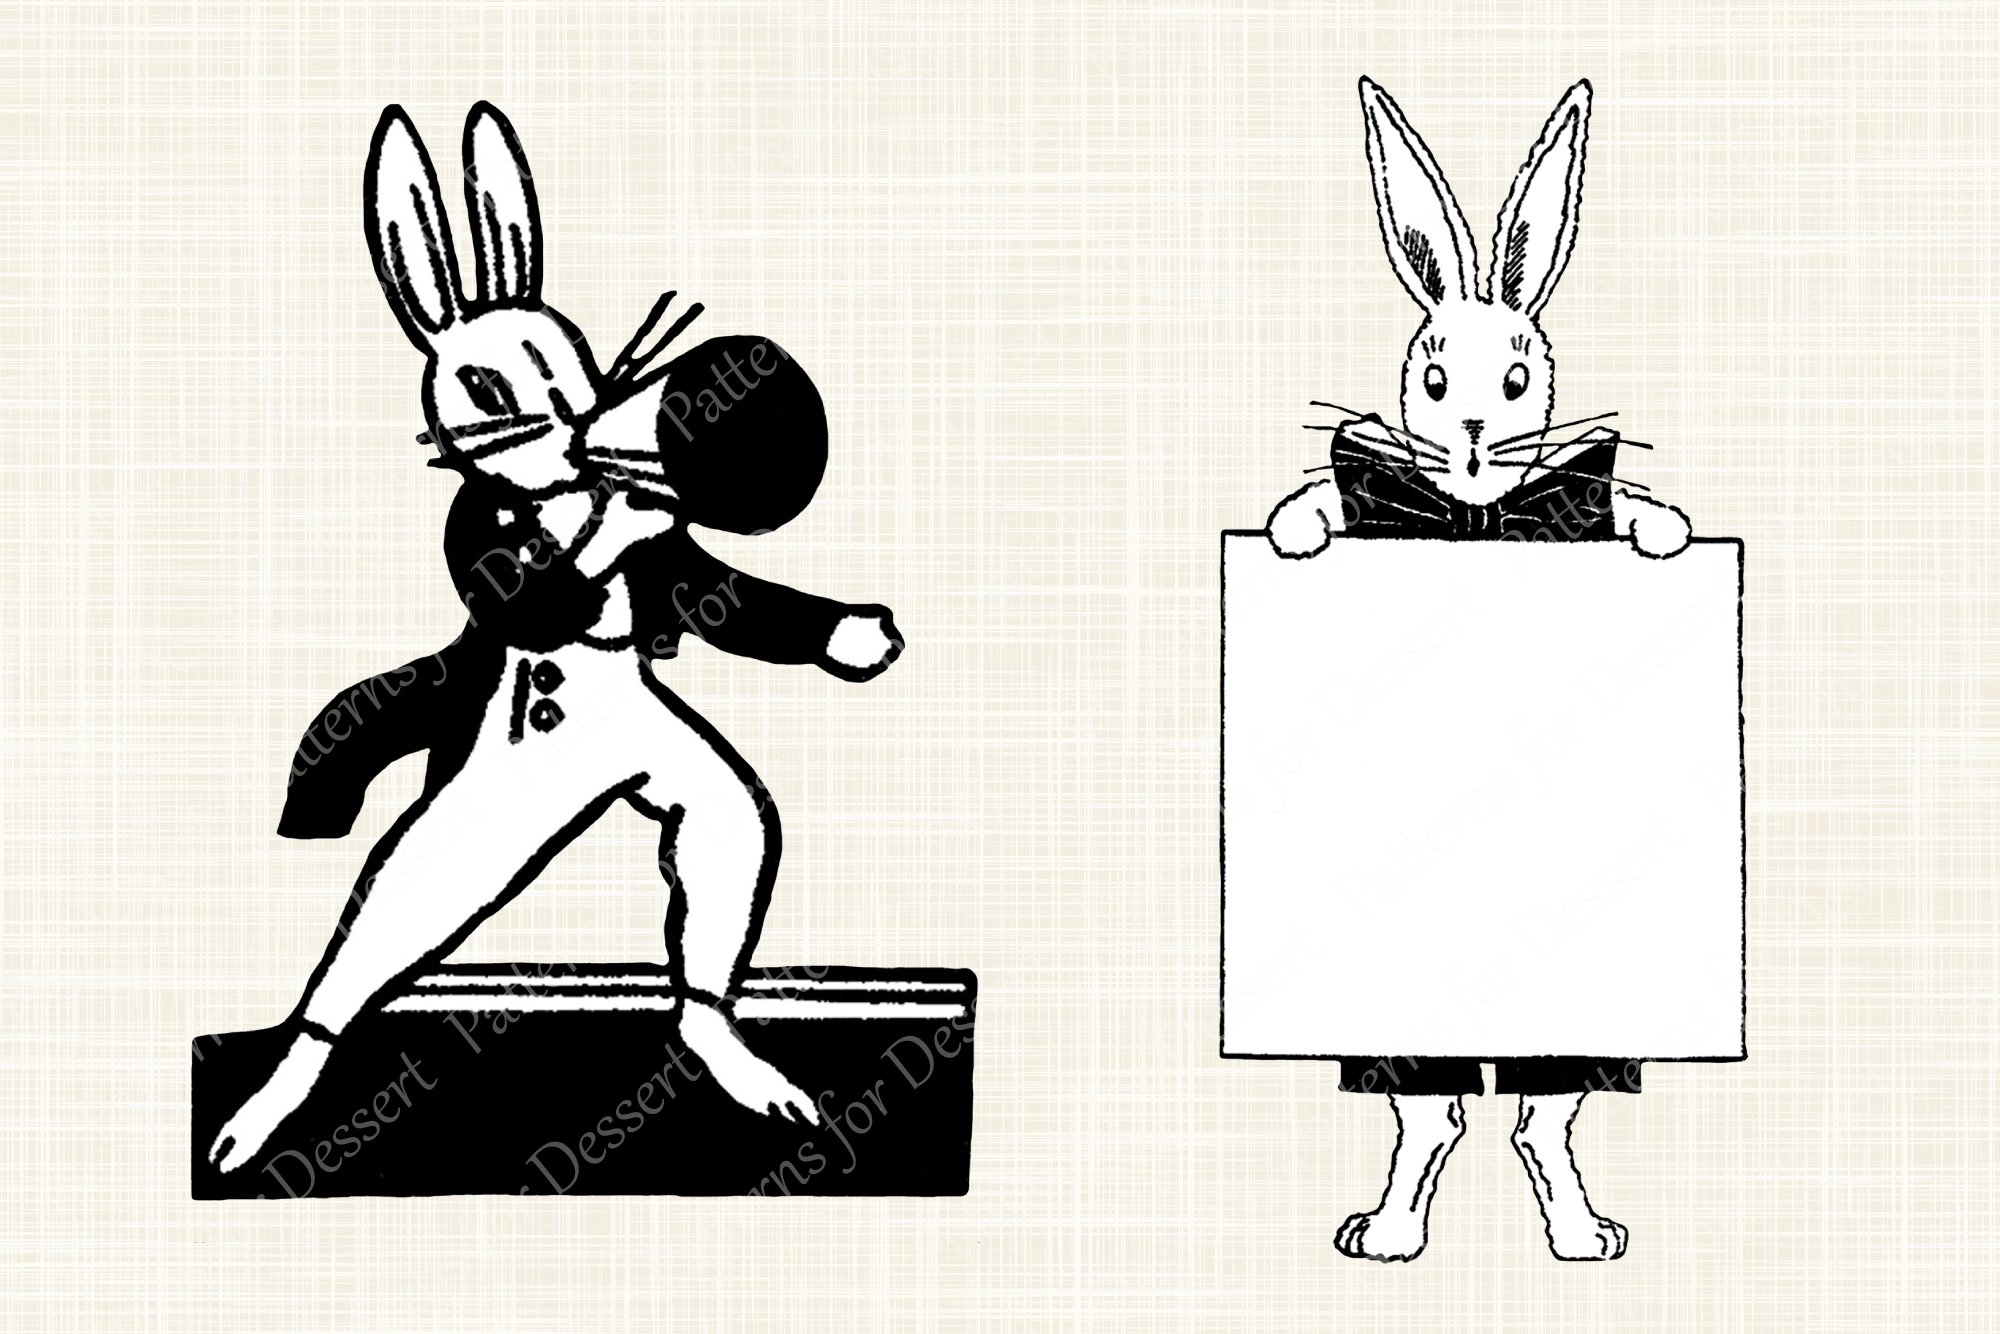 BW illustration with funny rabbits.